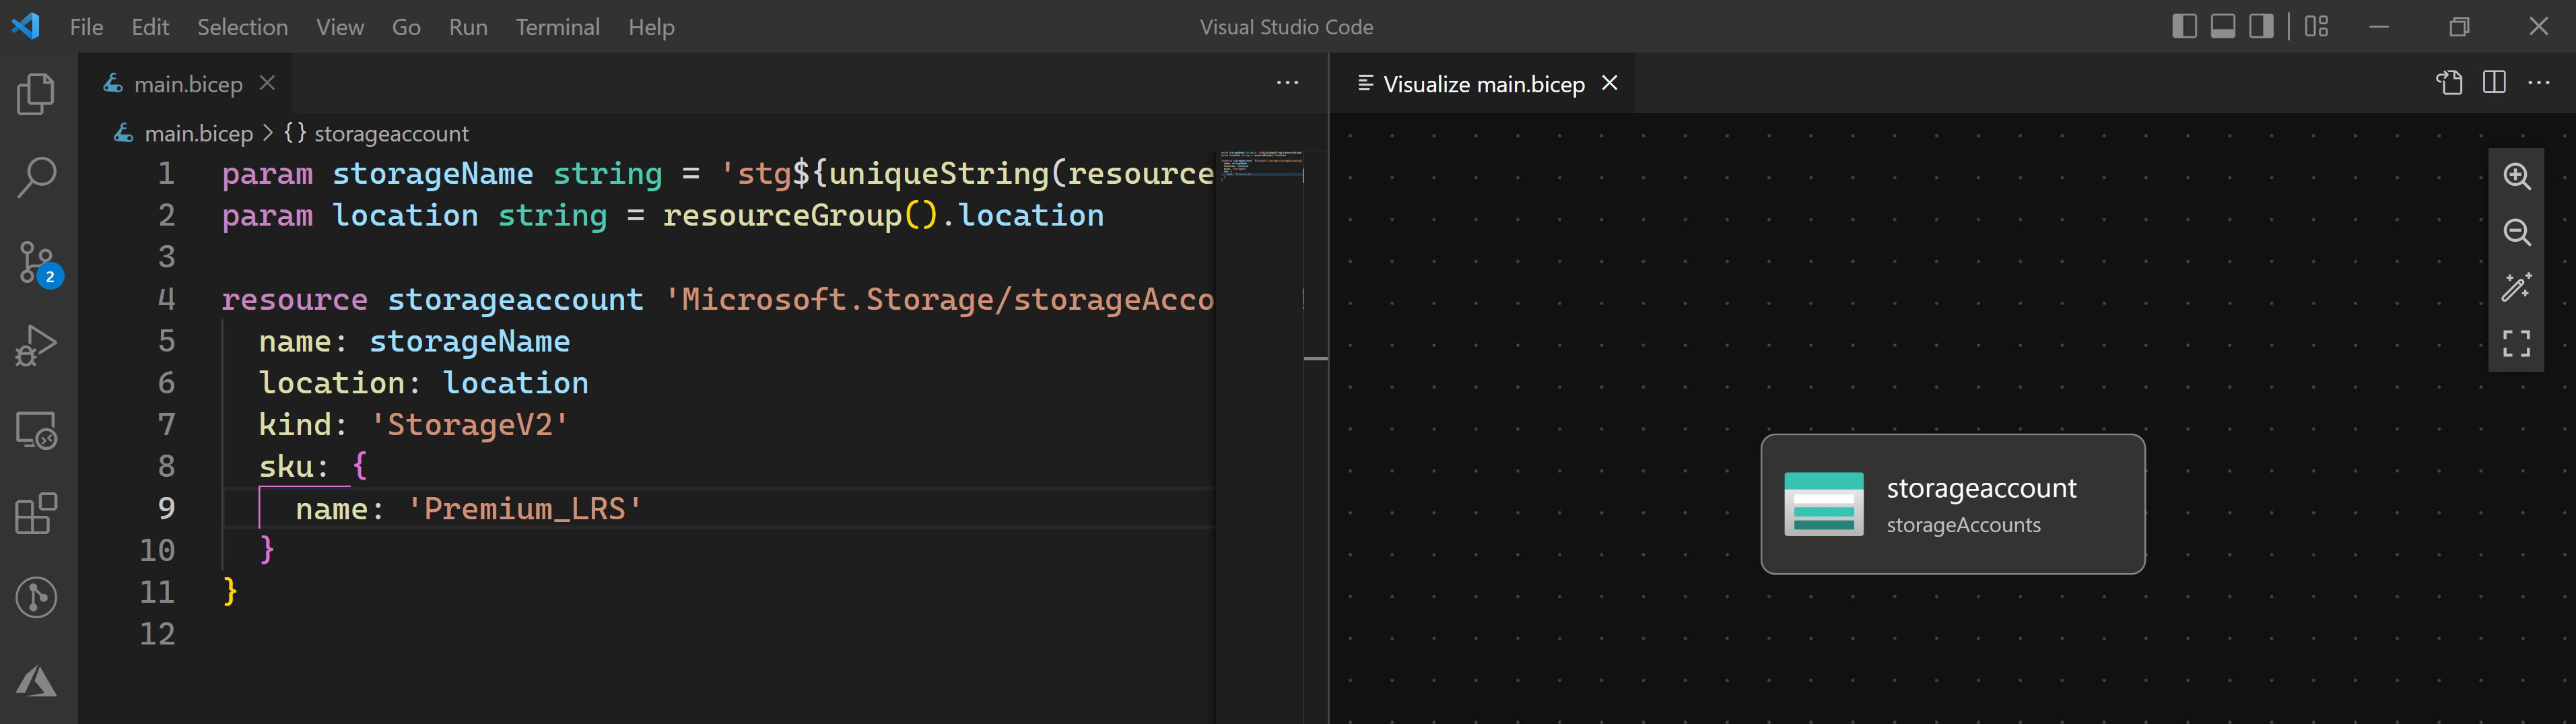 Screenshot of V S Code feature to make a representation of Bicep resources.